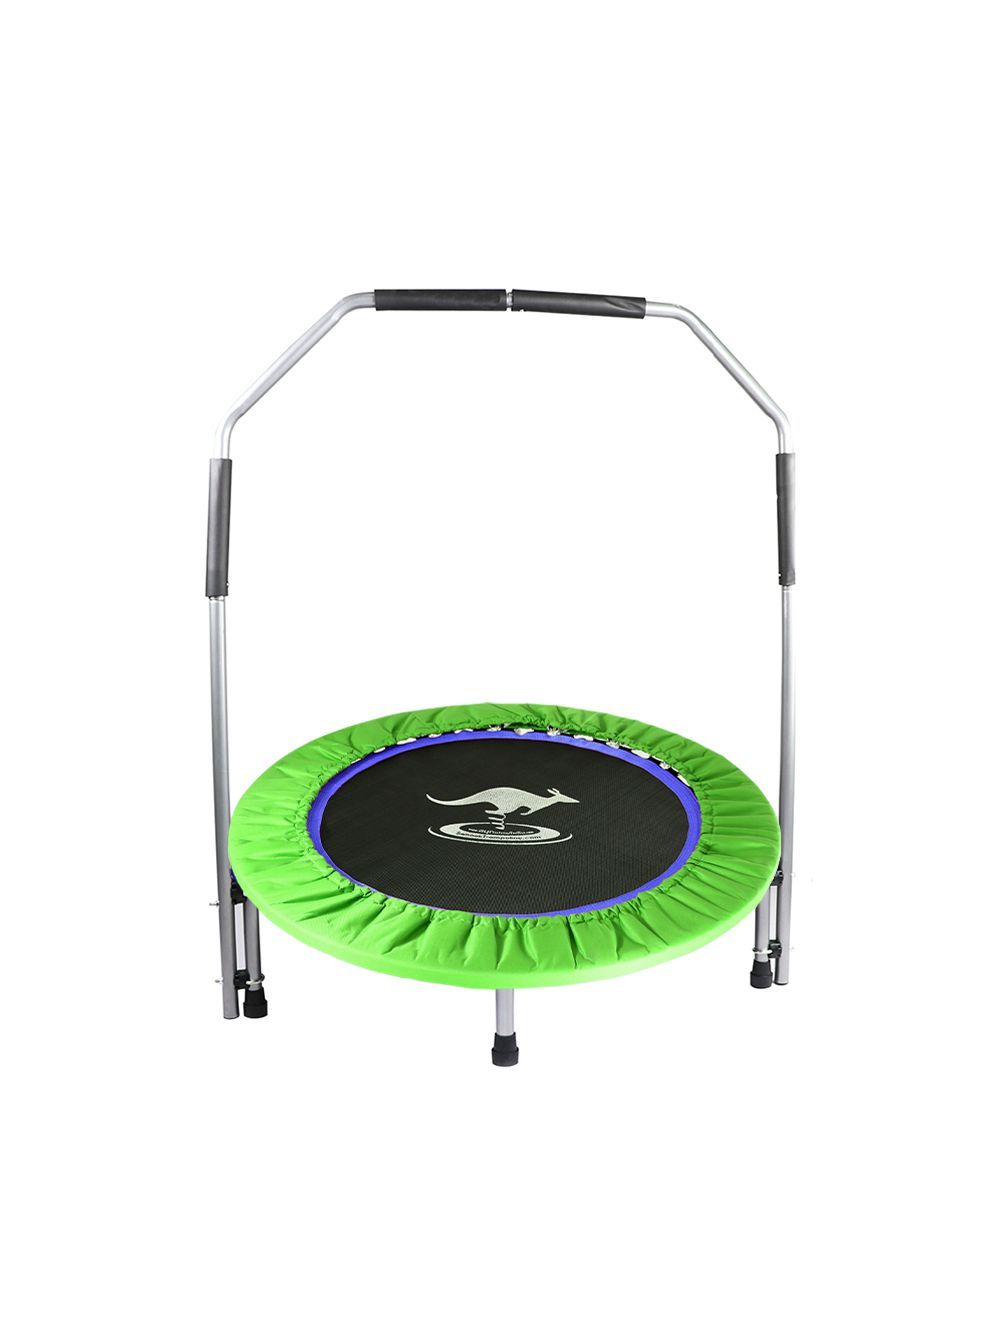 40　trampoline　fit　handles,　(100　jumping　play　positions.　with　many　can　springboard　Smartplayonly　cm.)　inches　firm